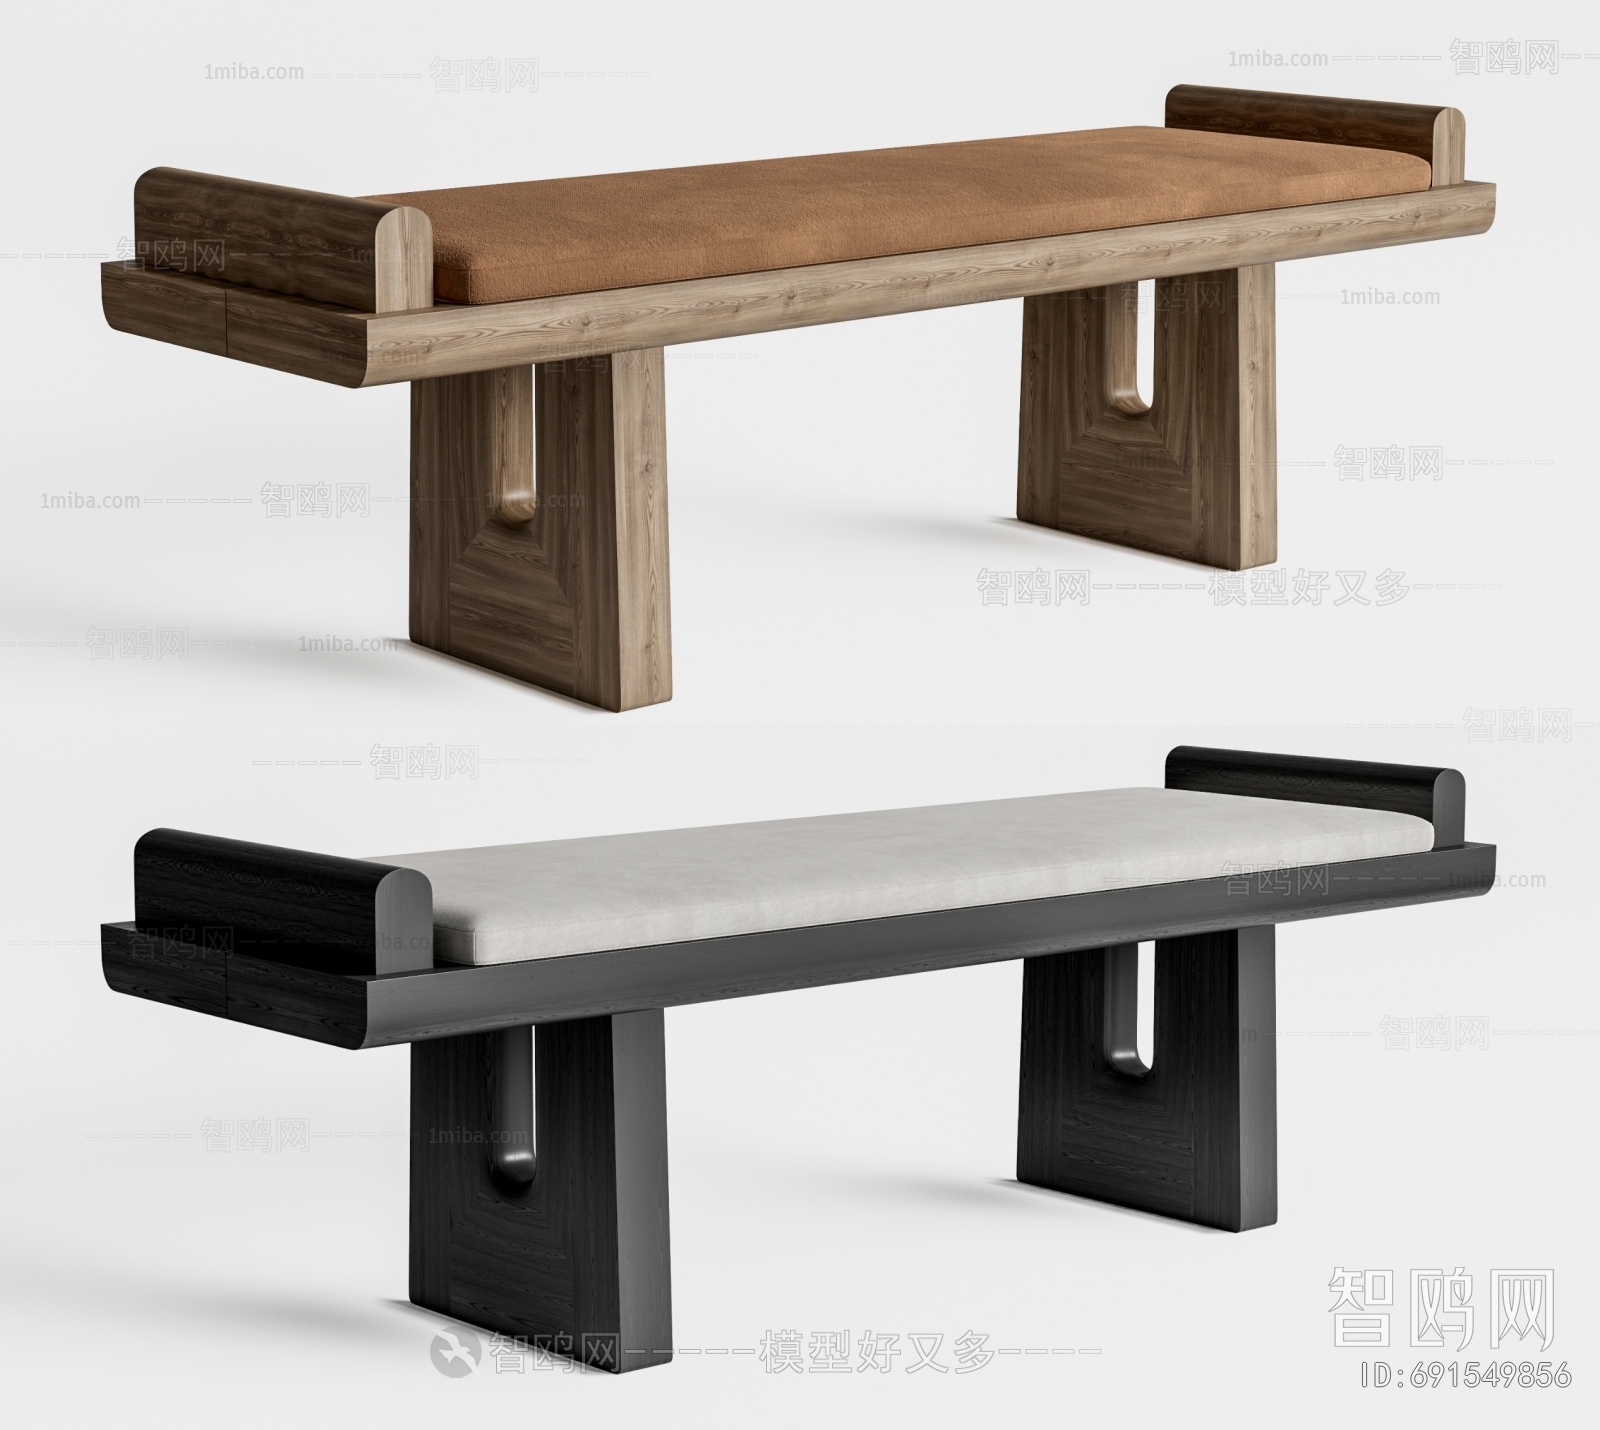 Japanese Style Bench